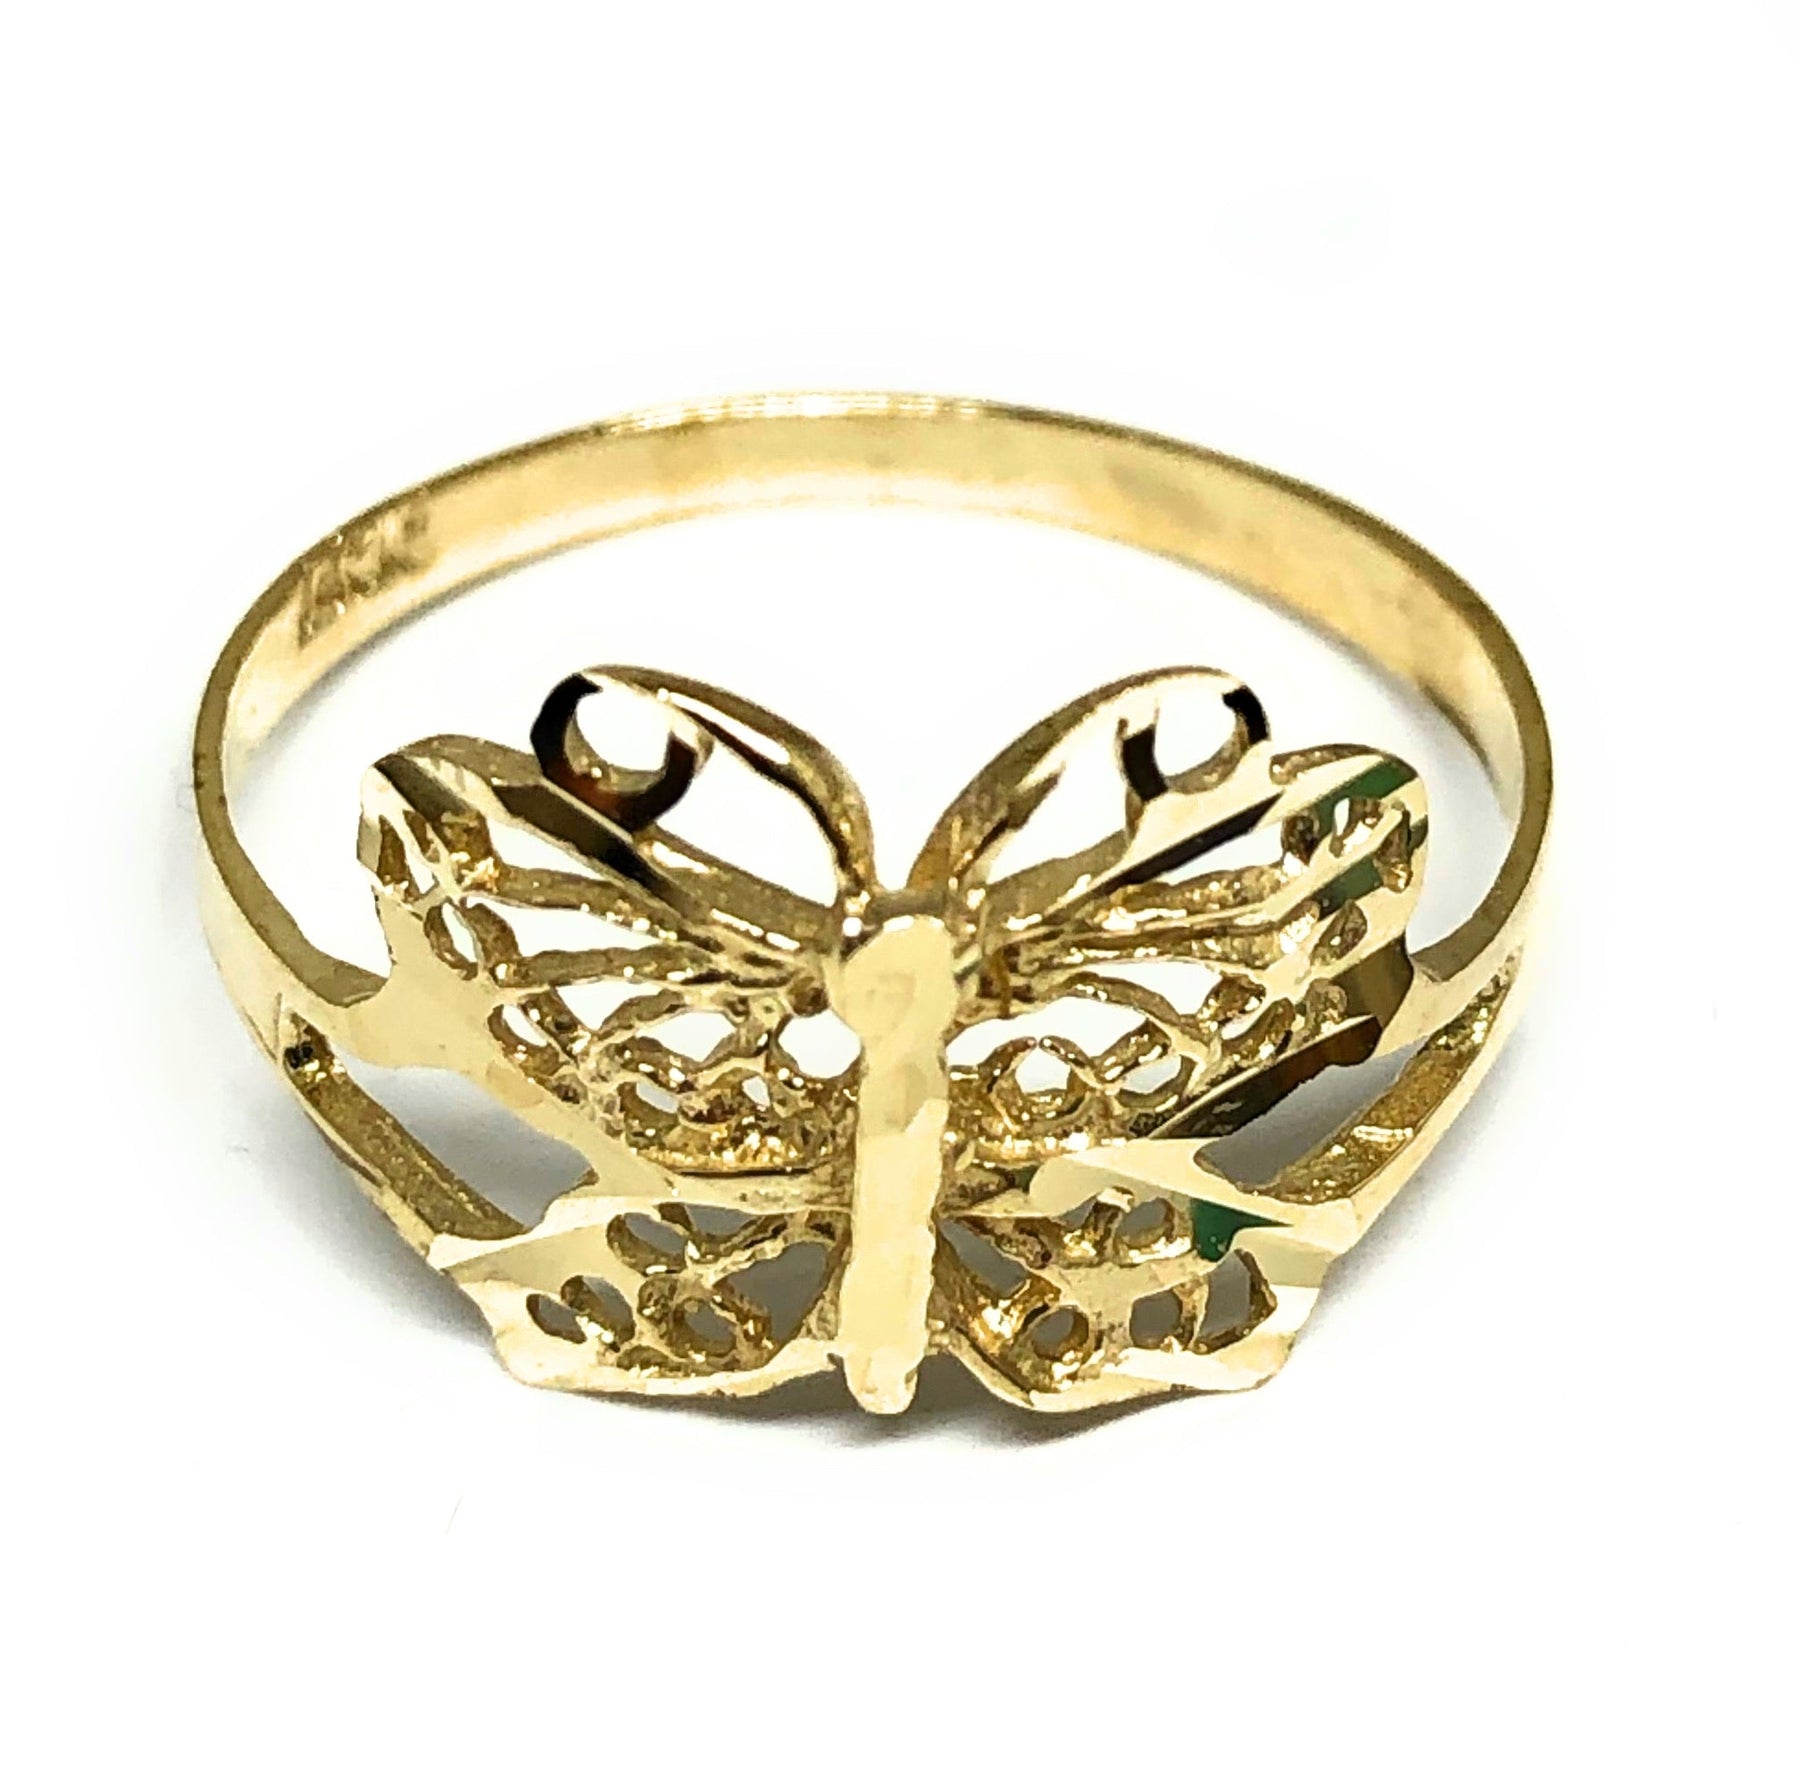 Buy Beautiful Butterfly Design Rose Gold Adjustable Finger Ring for Female